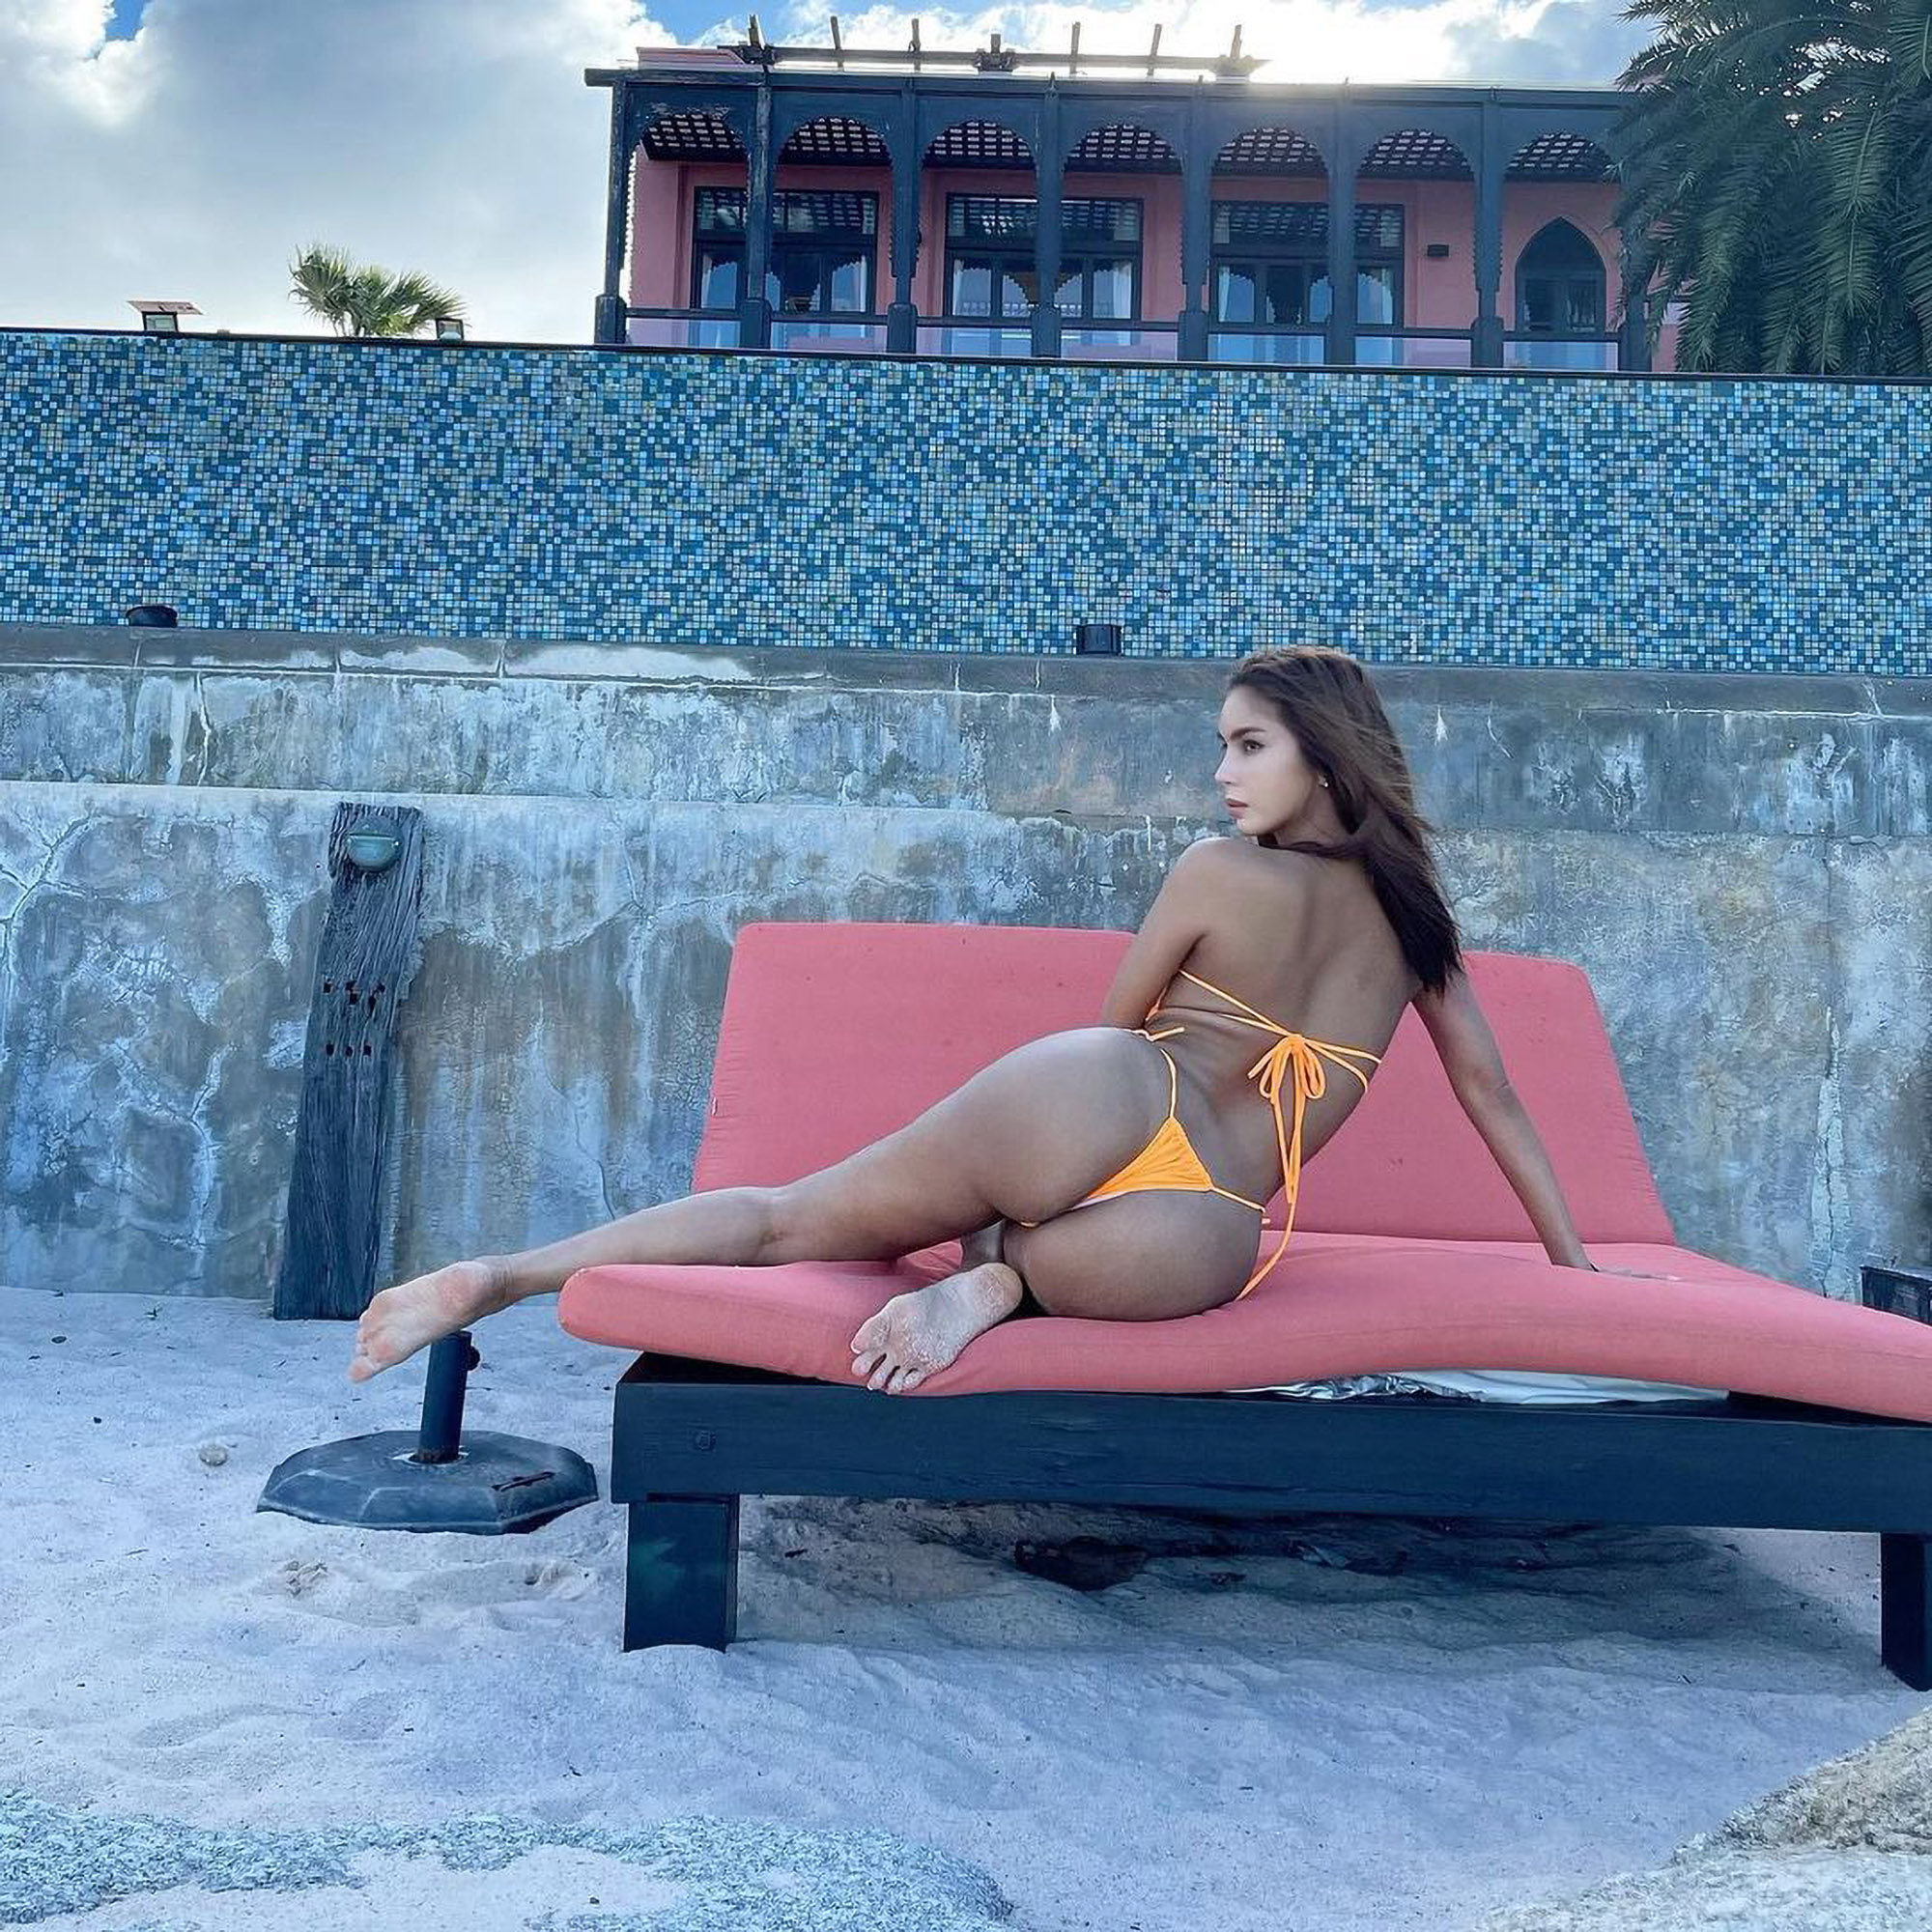 Read more about the article Malaysian Trans Influencer Angers Religious Trolls With Bikini Snap In New Aussie Home